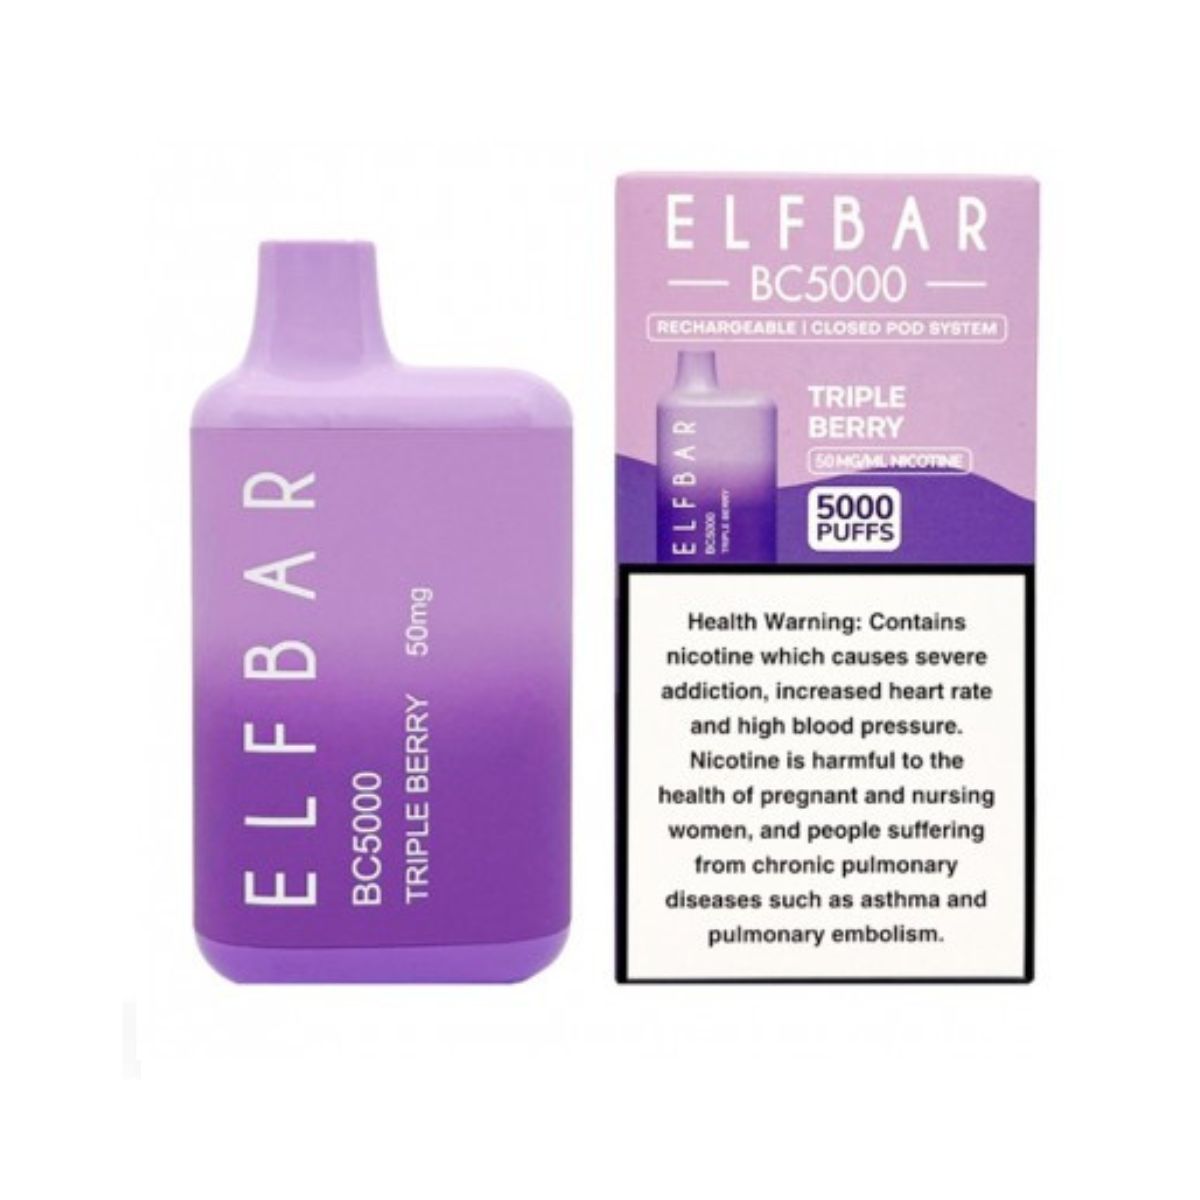 Elfbar BC5000 - Rechargeable Disposable - 5000 Puffs Vape Device - Triple Berry Ice